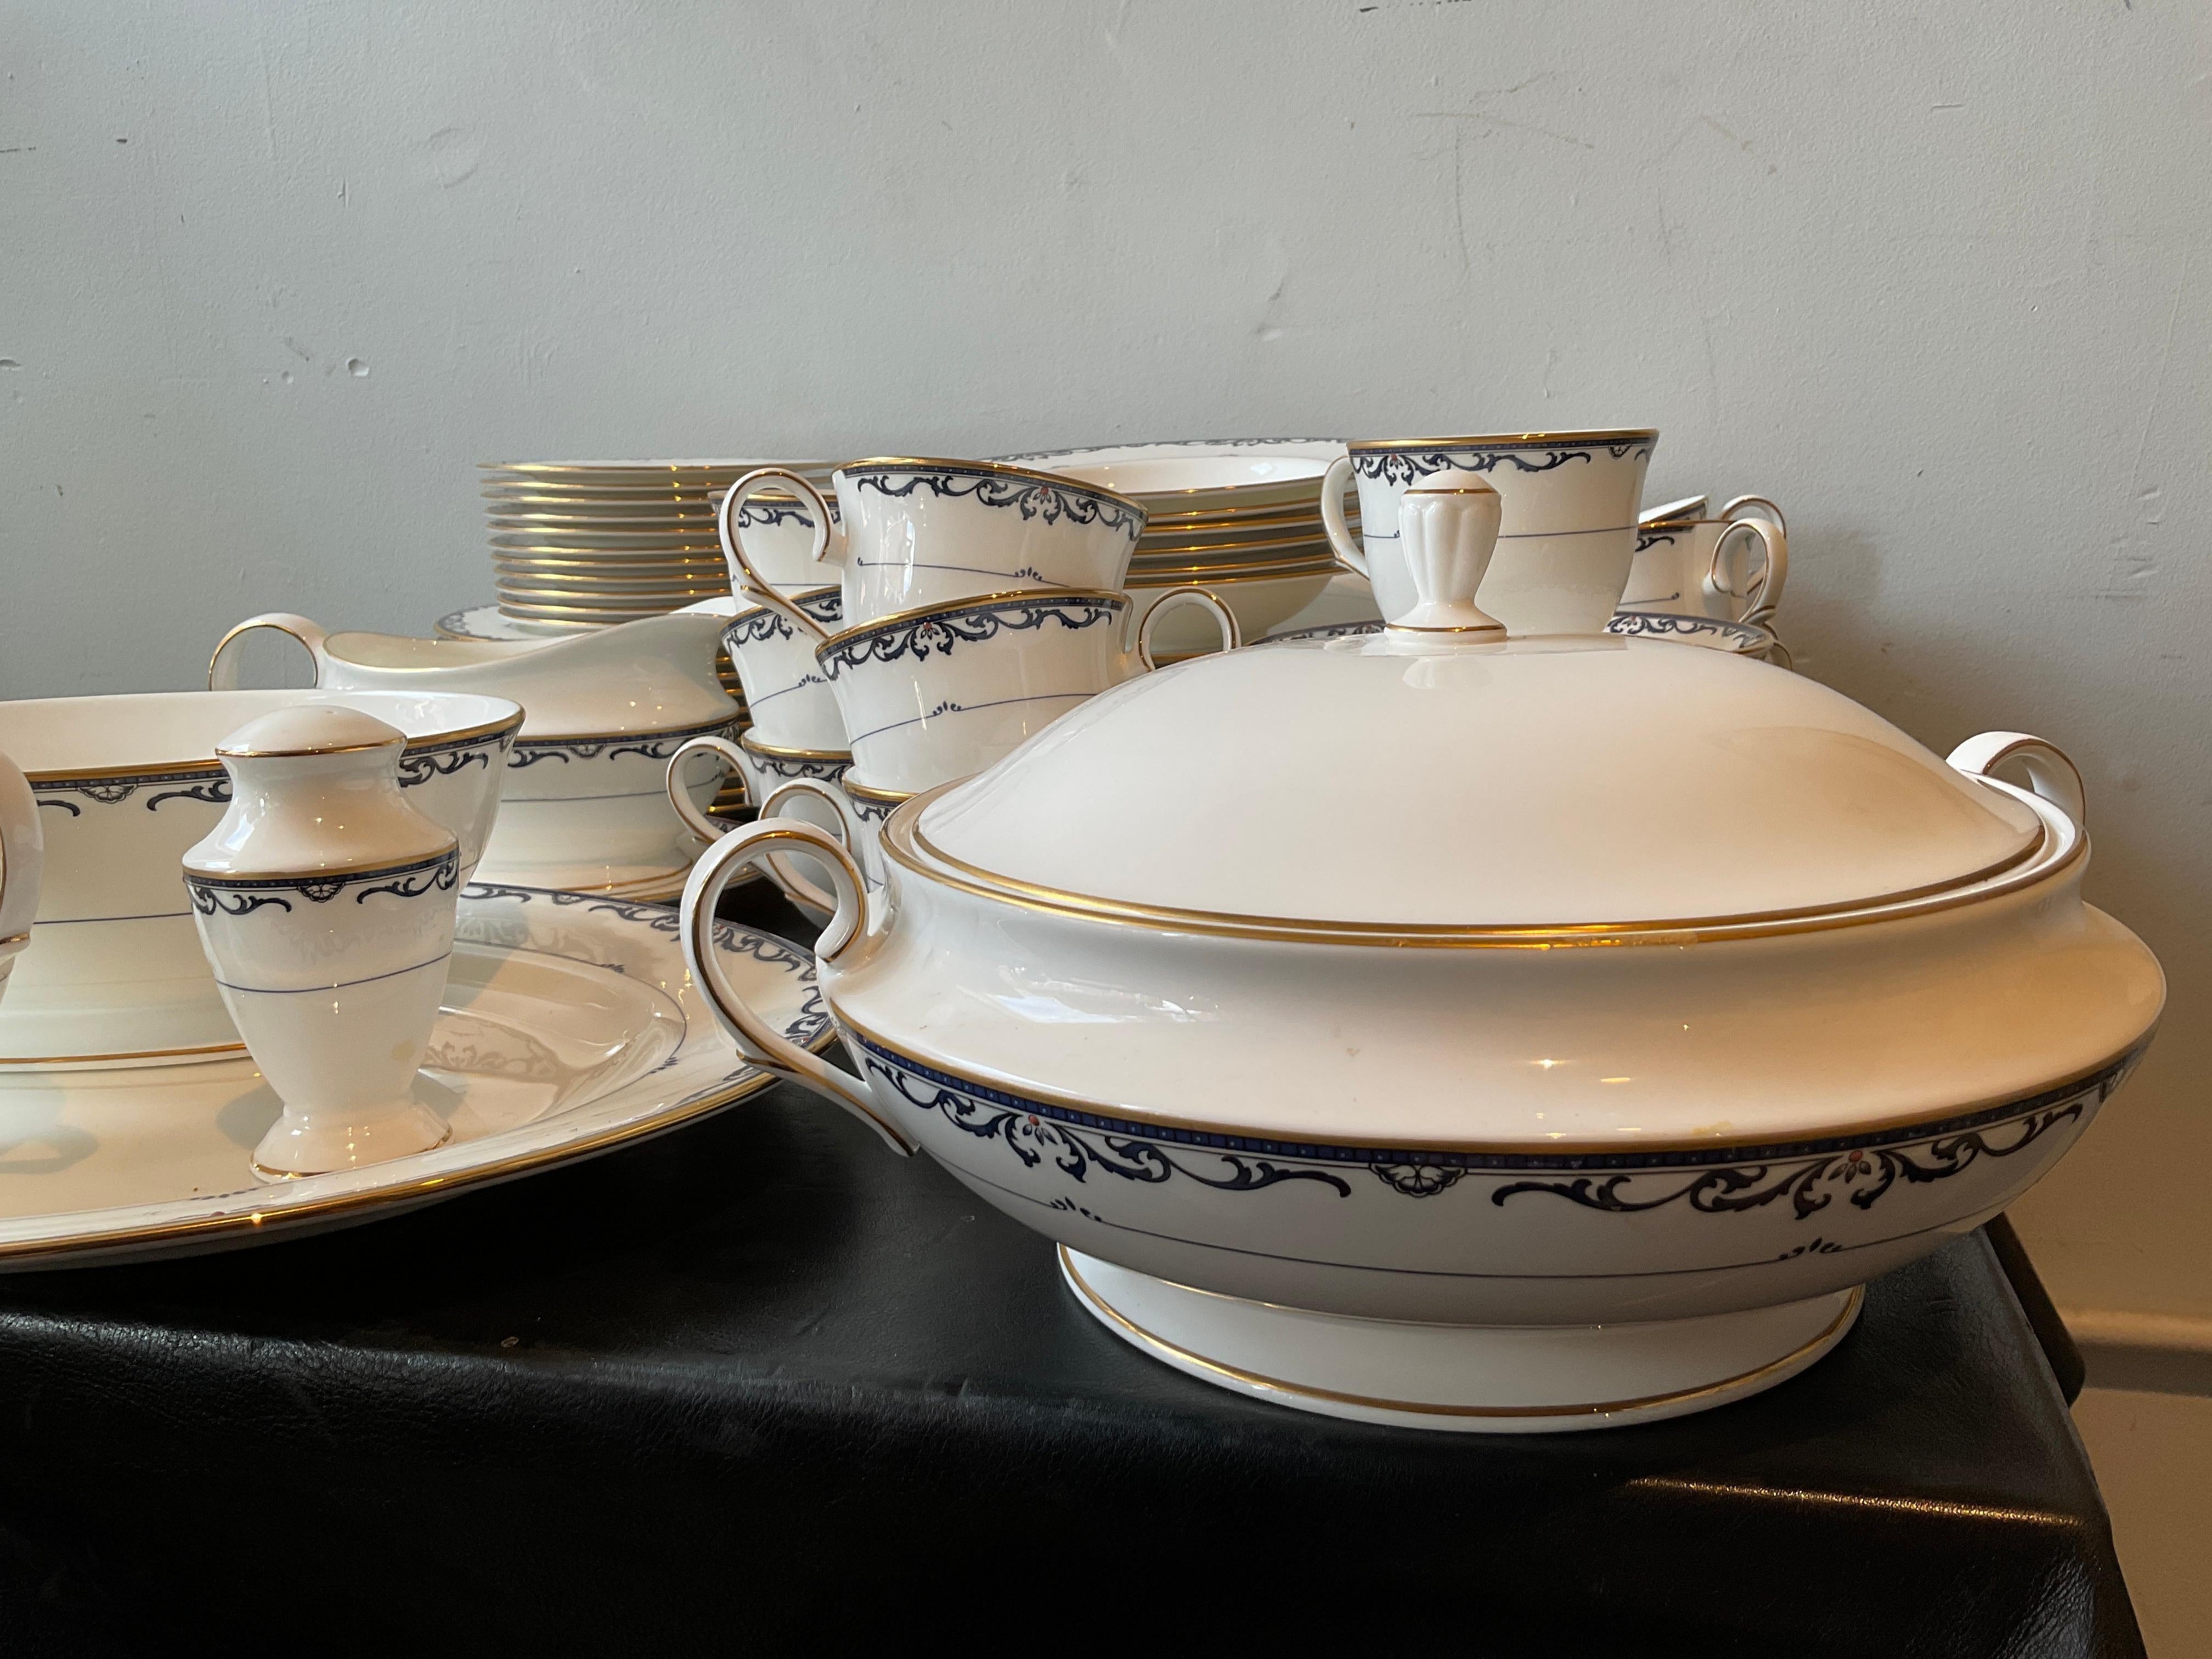 LENOX ROYAL SCROLL 
11 Dinner Plates
11 Salad plates
6 Soup bowls
11 Bread and butter plates
11 Saucers
11 Cups
1 Gravy boat and plate
1 Tureen 
1 large Platter
1 serving bowl
1 Salt shaker
1 Creamer


